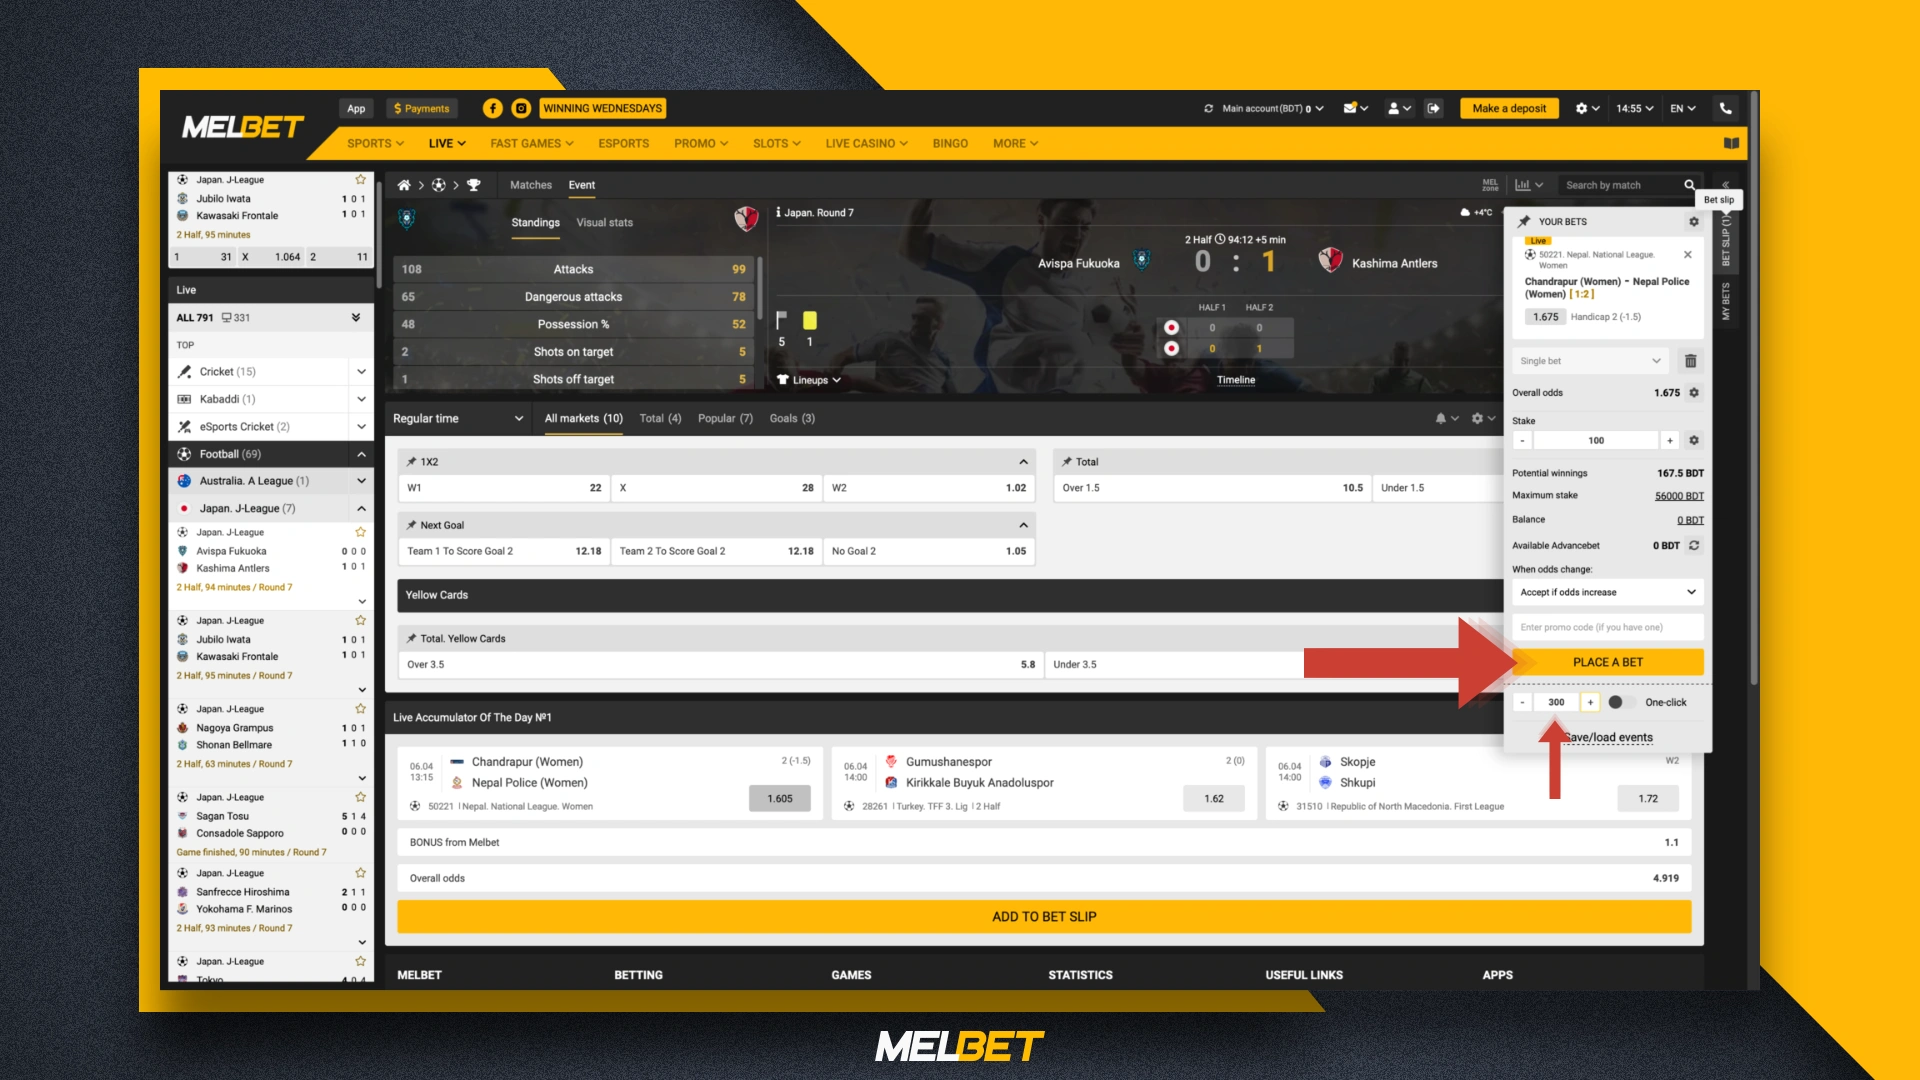 How to bet on the Melbet website